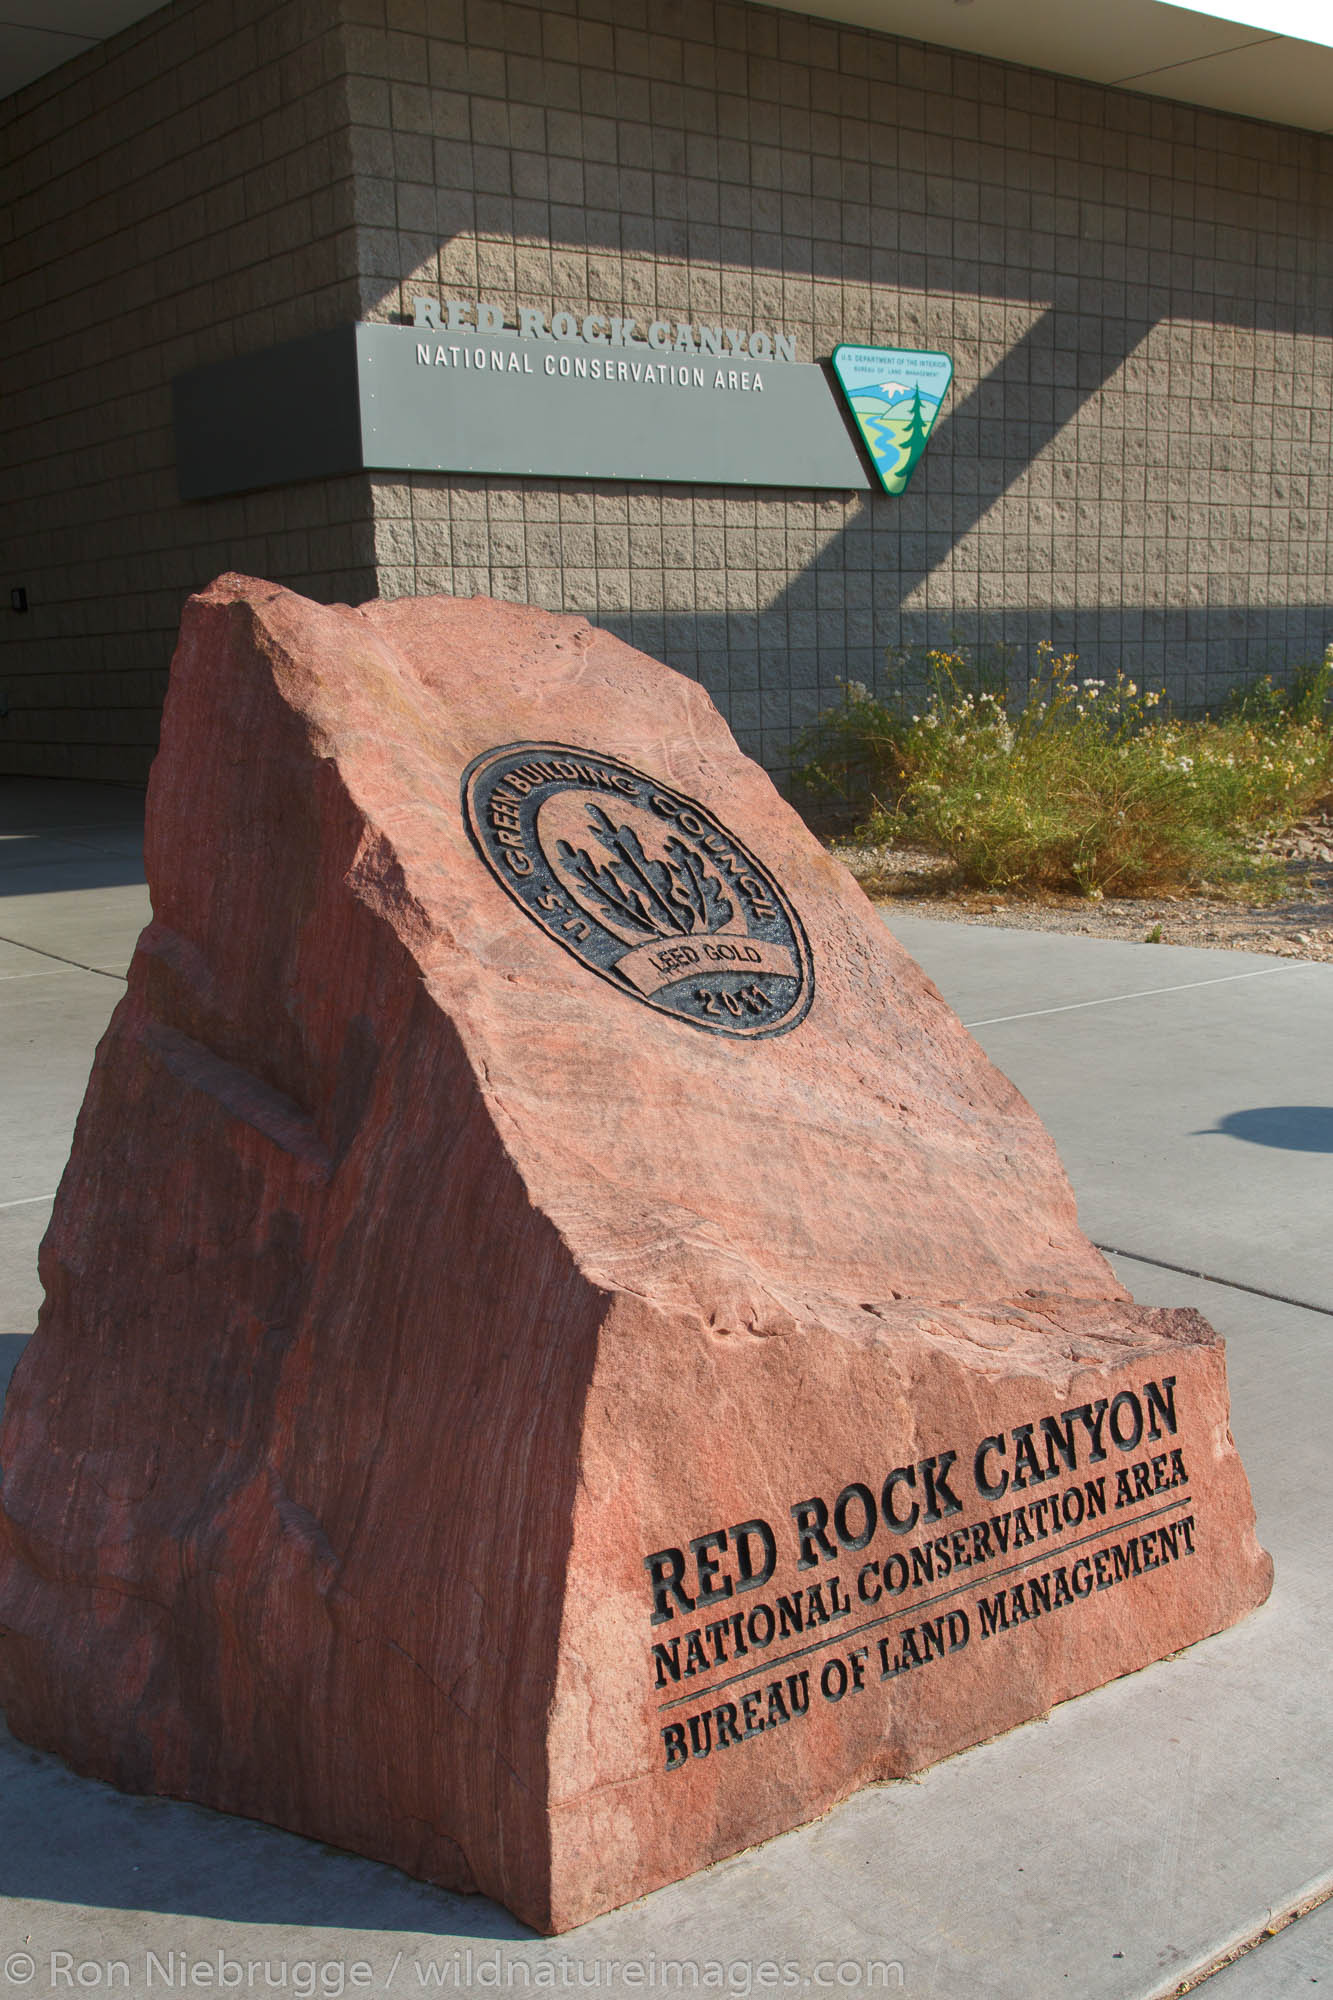 Red Rock Canyon National Conservation Area Visitor Center, Las Vegas, Nevada